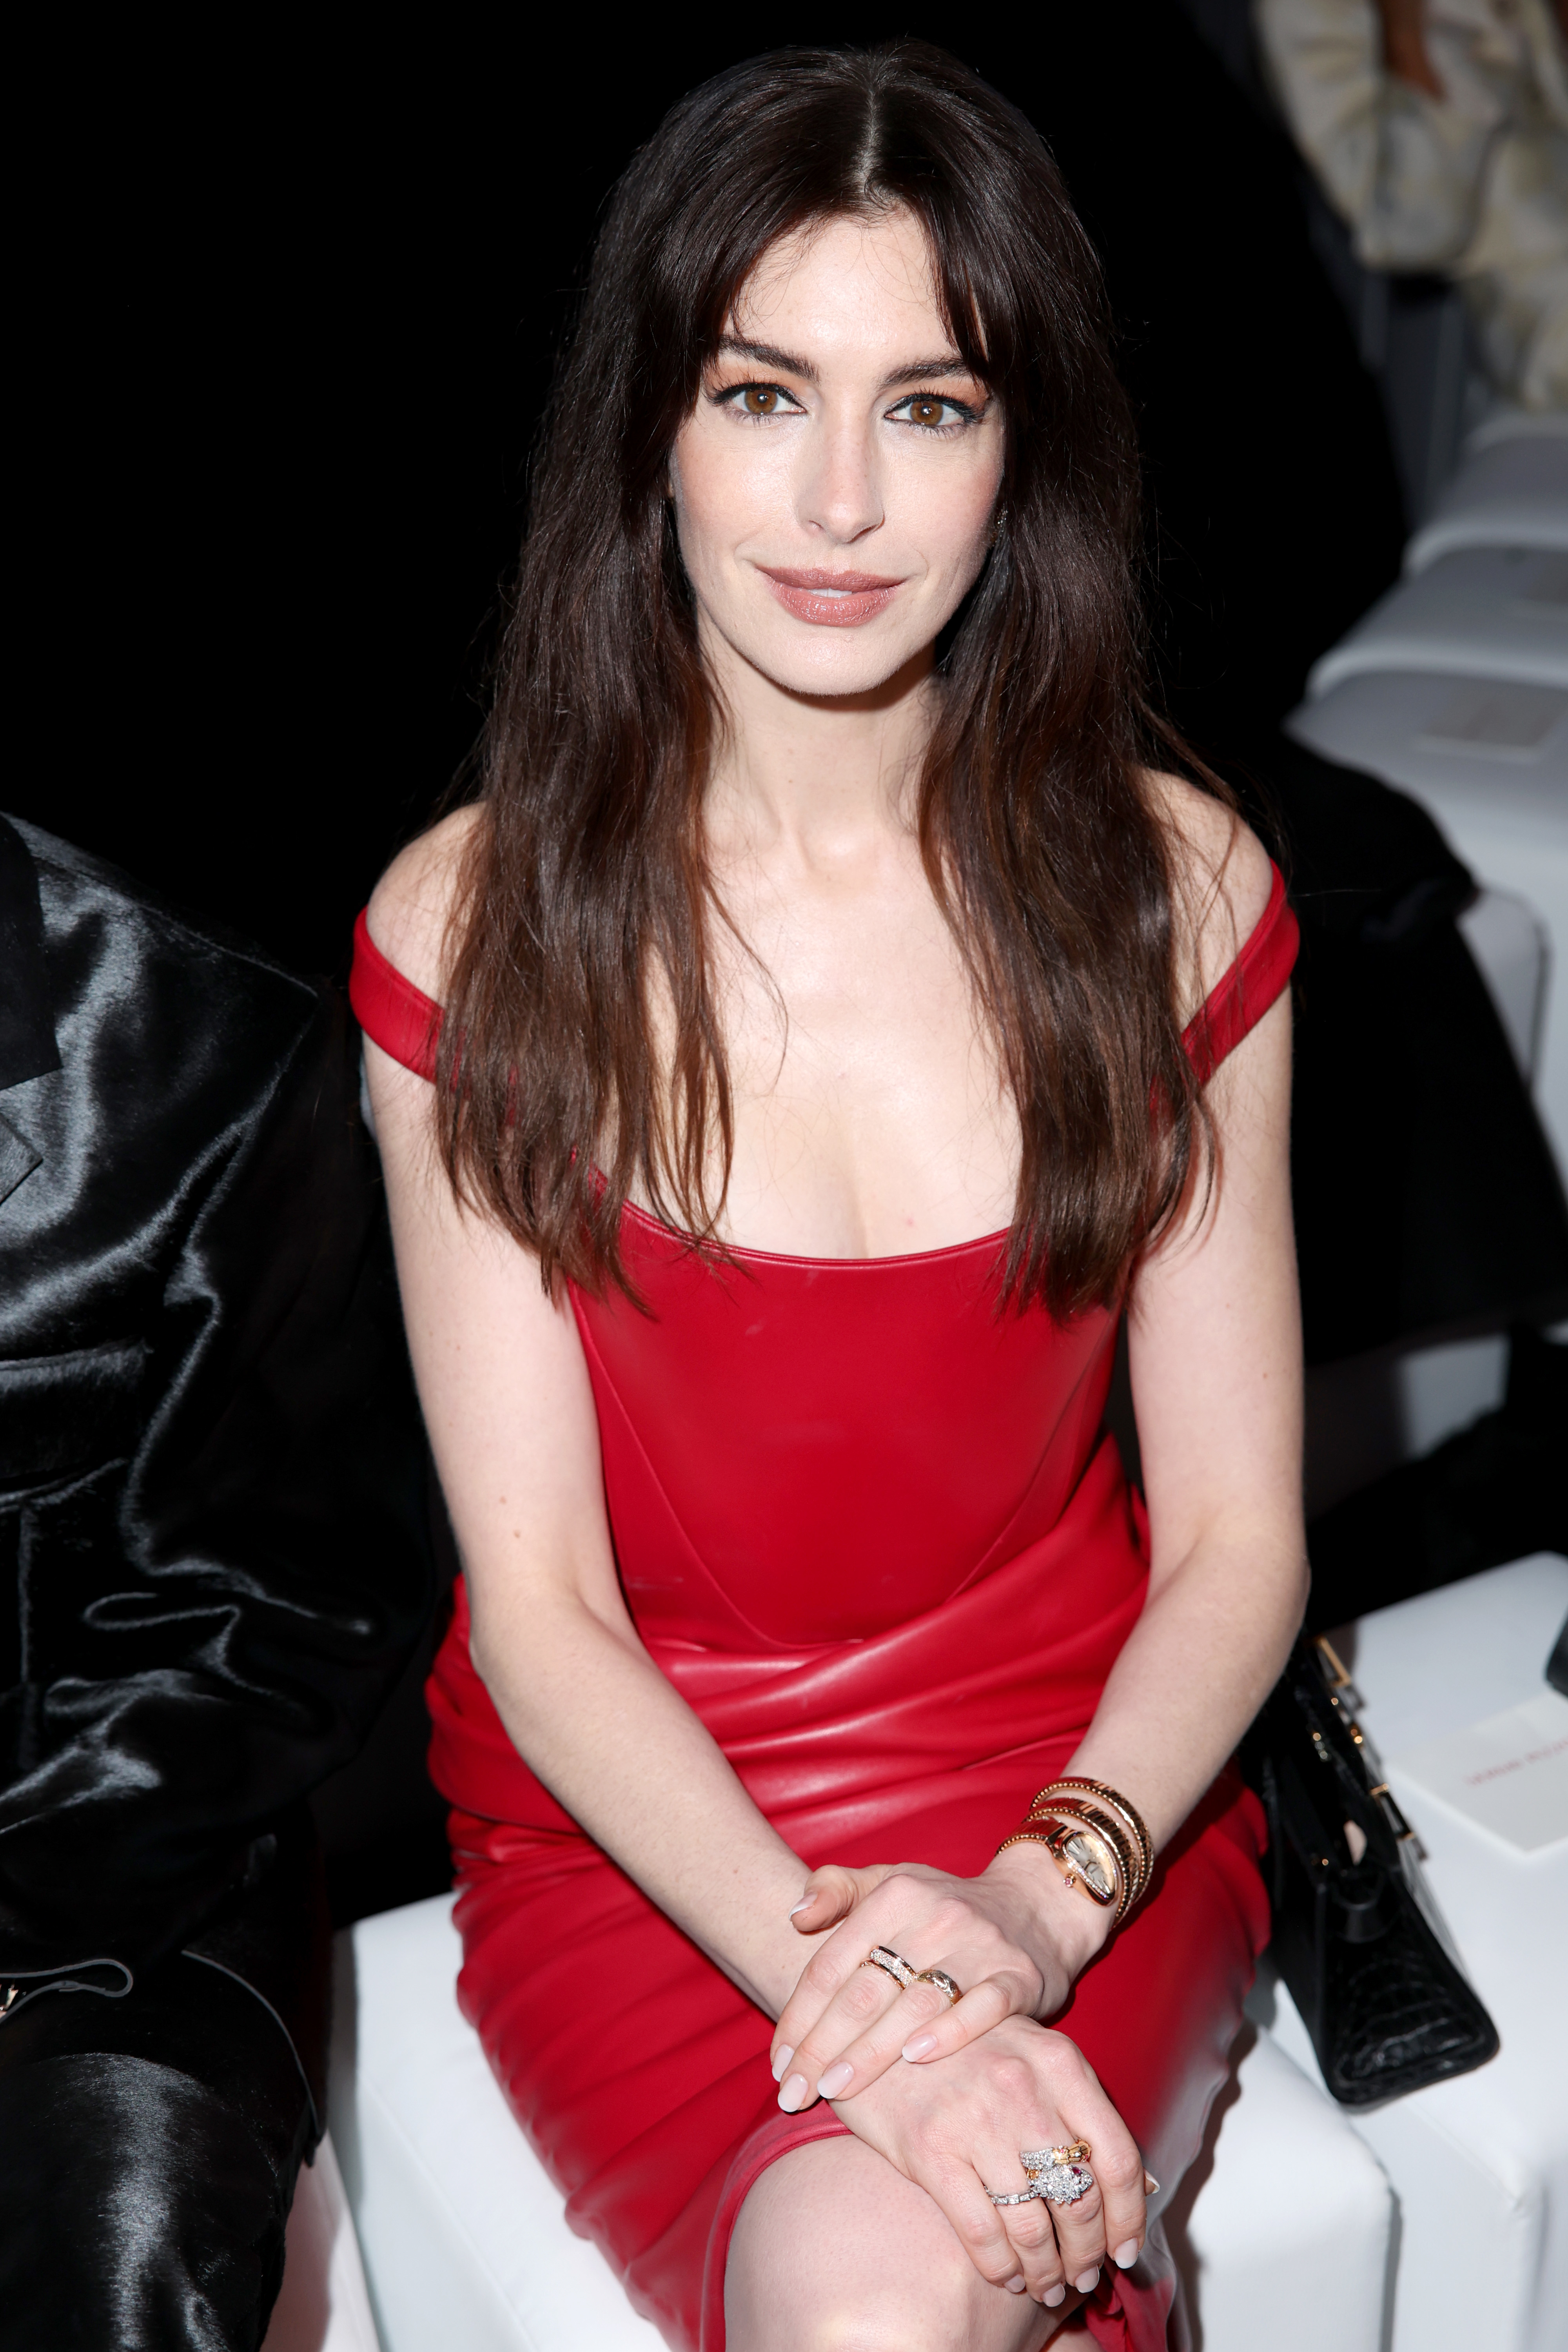 Anne Hathaway in a red off-shoulder dress at an event, seated, with hands clasped